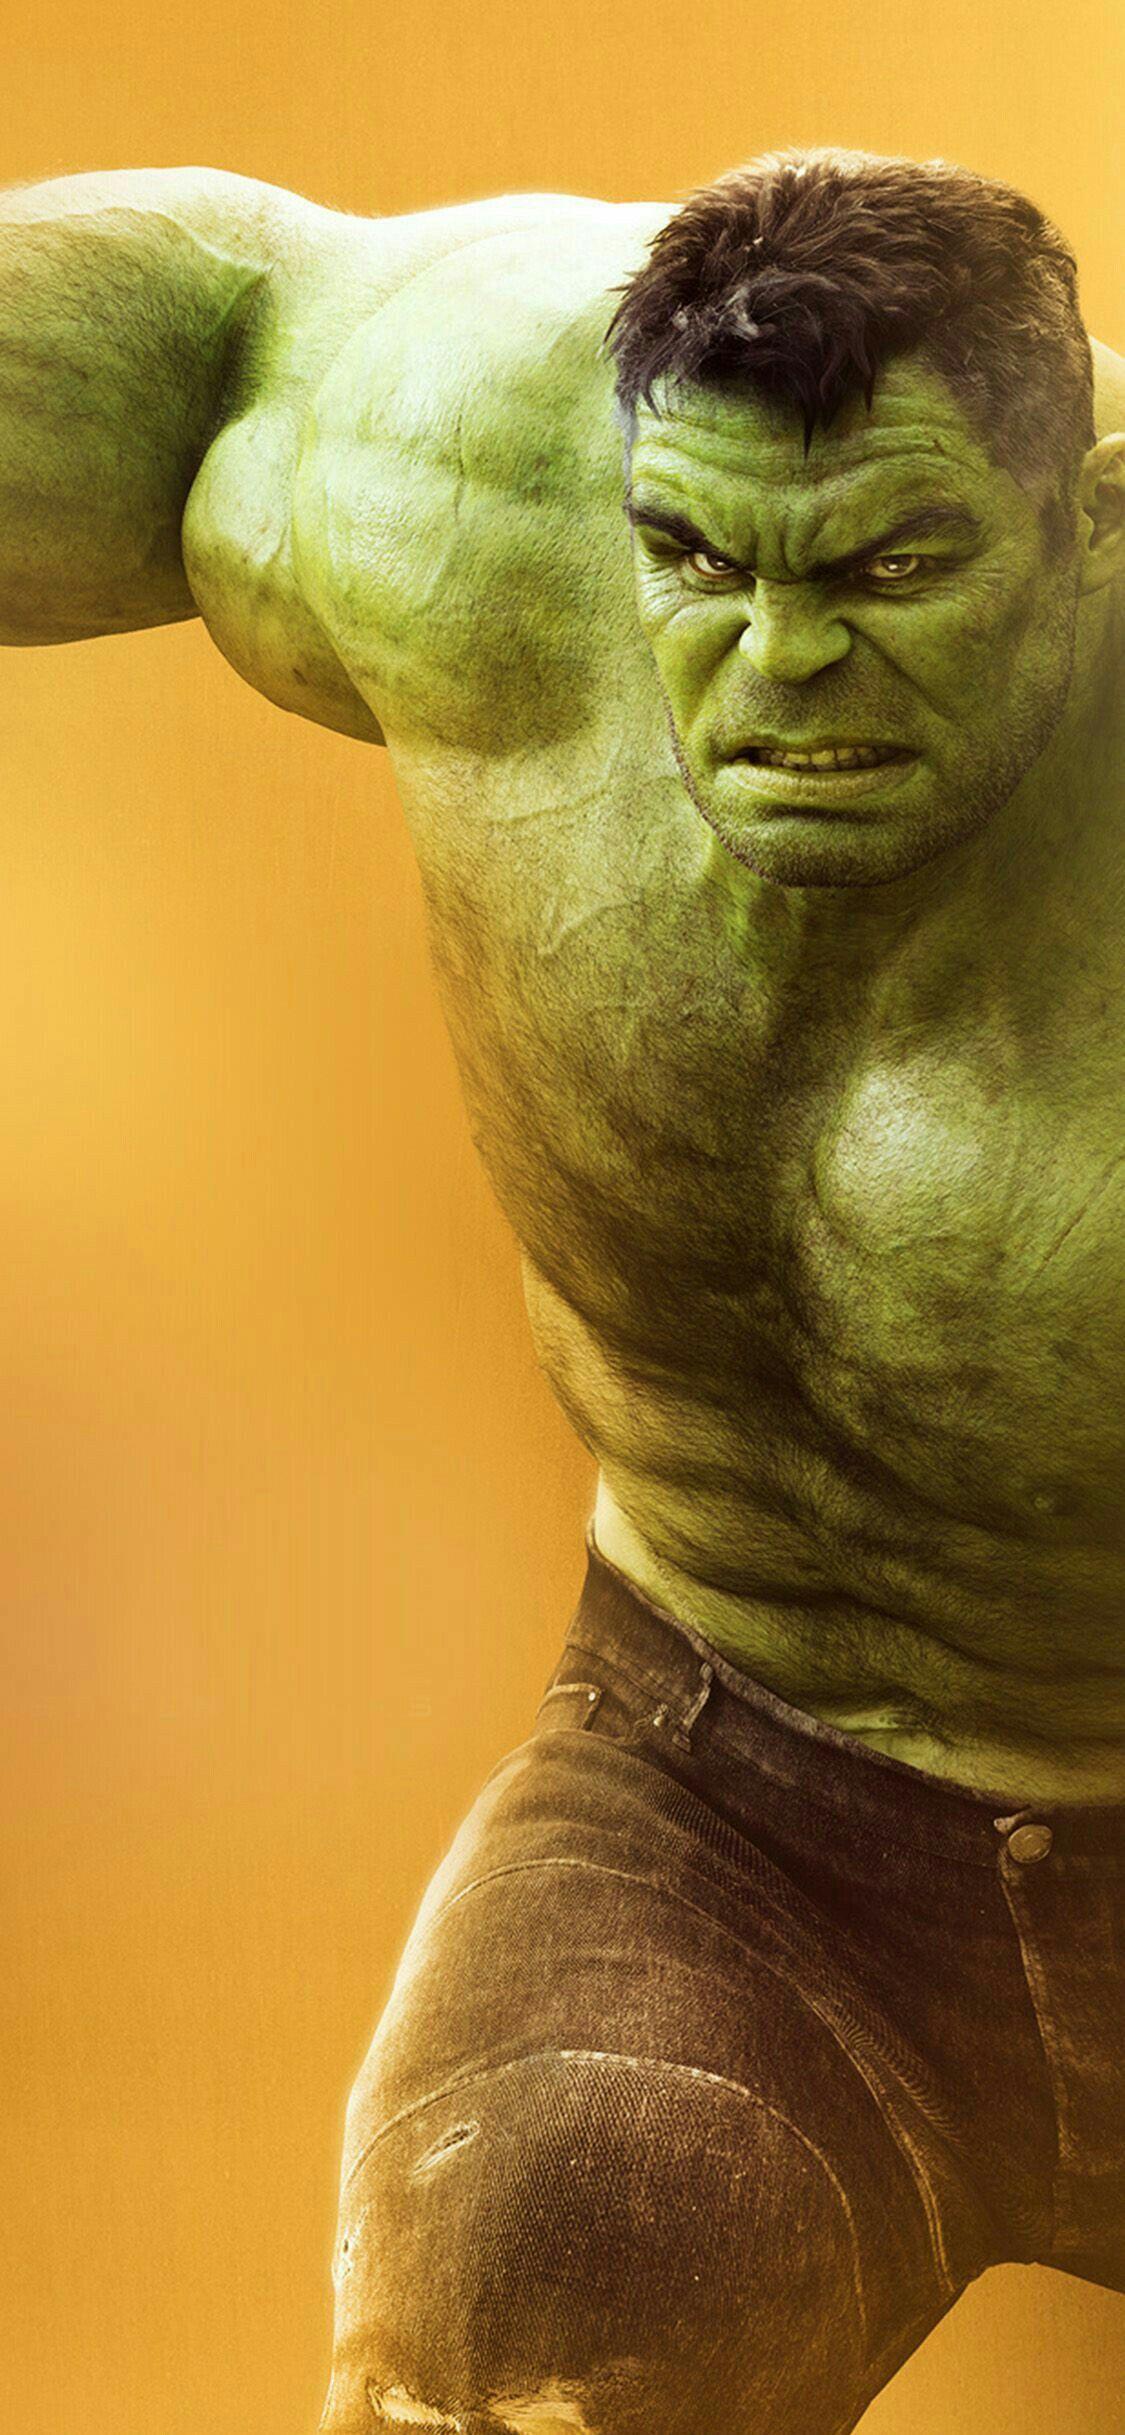 Somebody tried to check on the Hulk by holding him HD wallpaper download